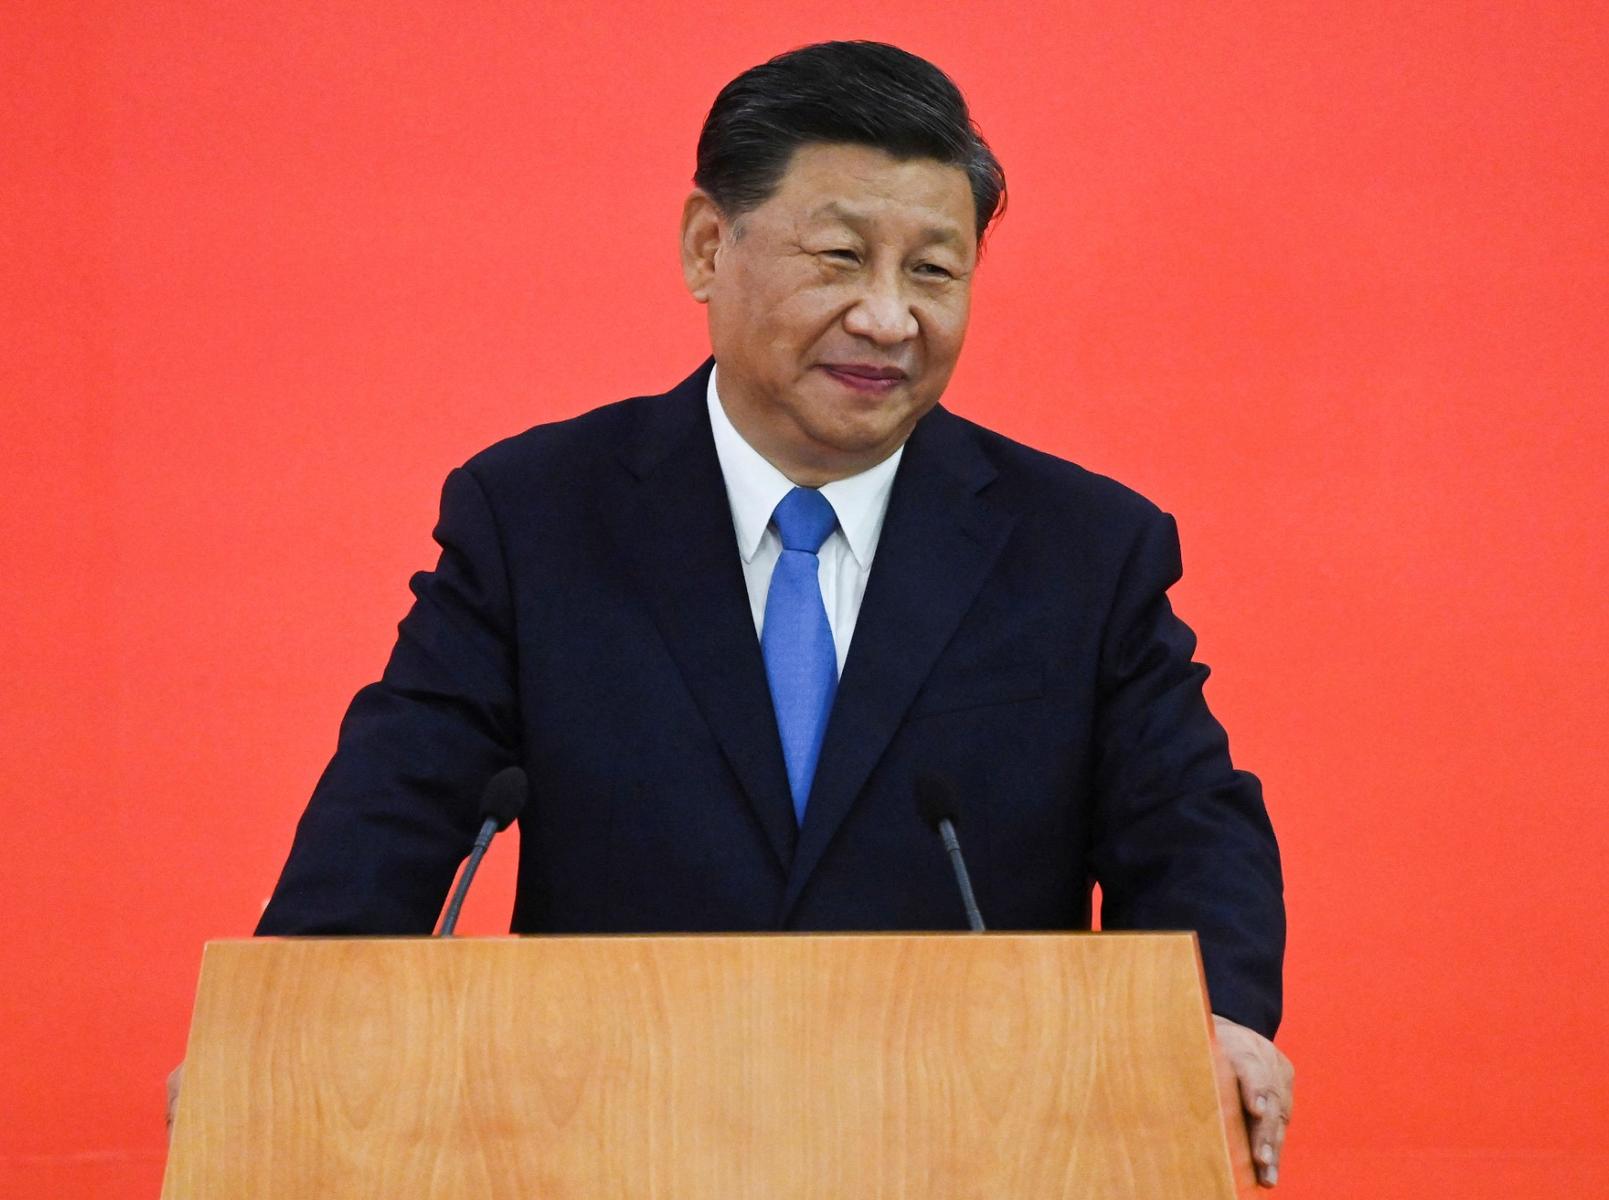 Xi Jinping, the current leader of China